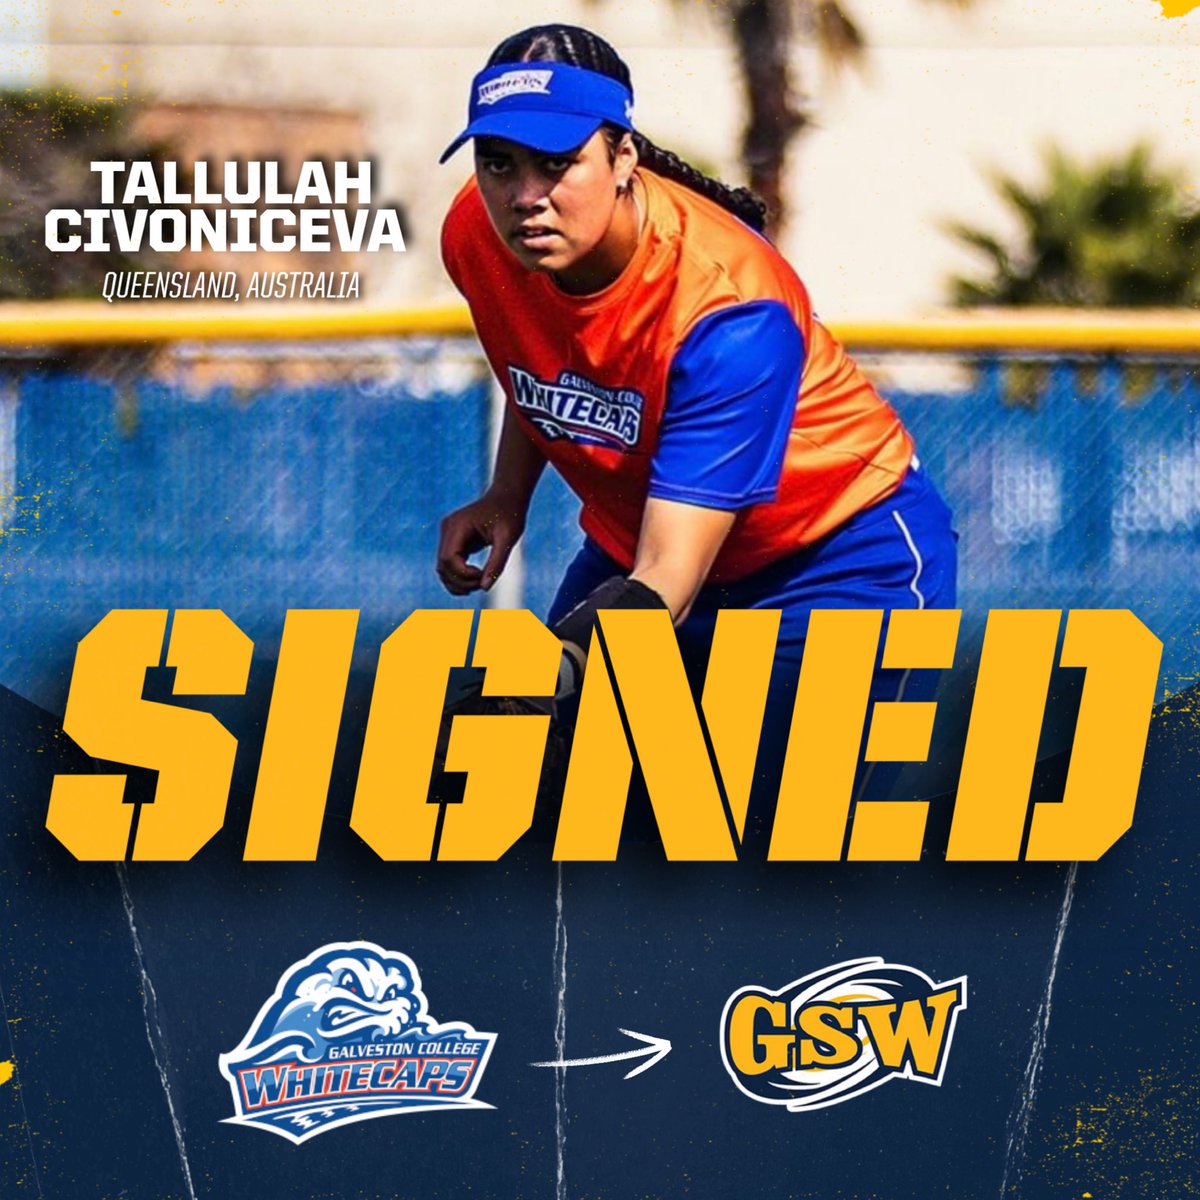 ✍️ Signed and sealed. Welcome to Americus, Tallulah!